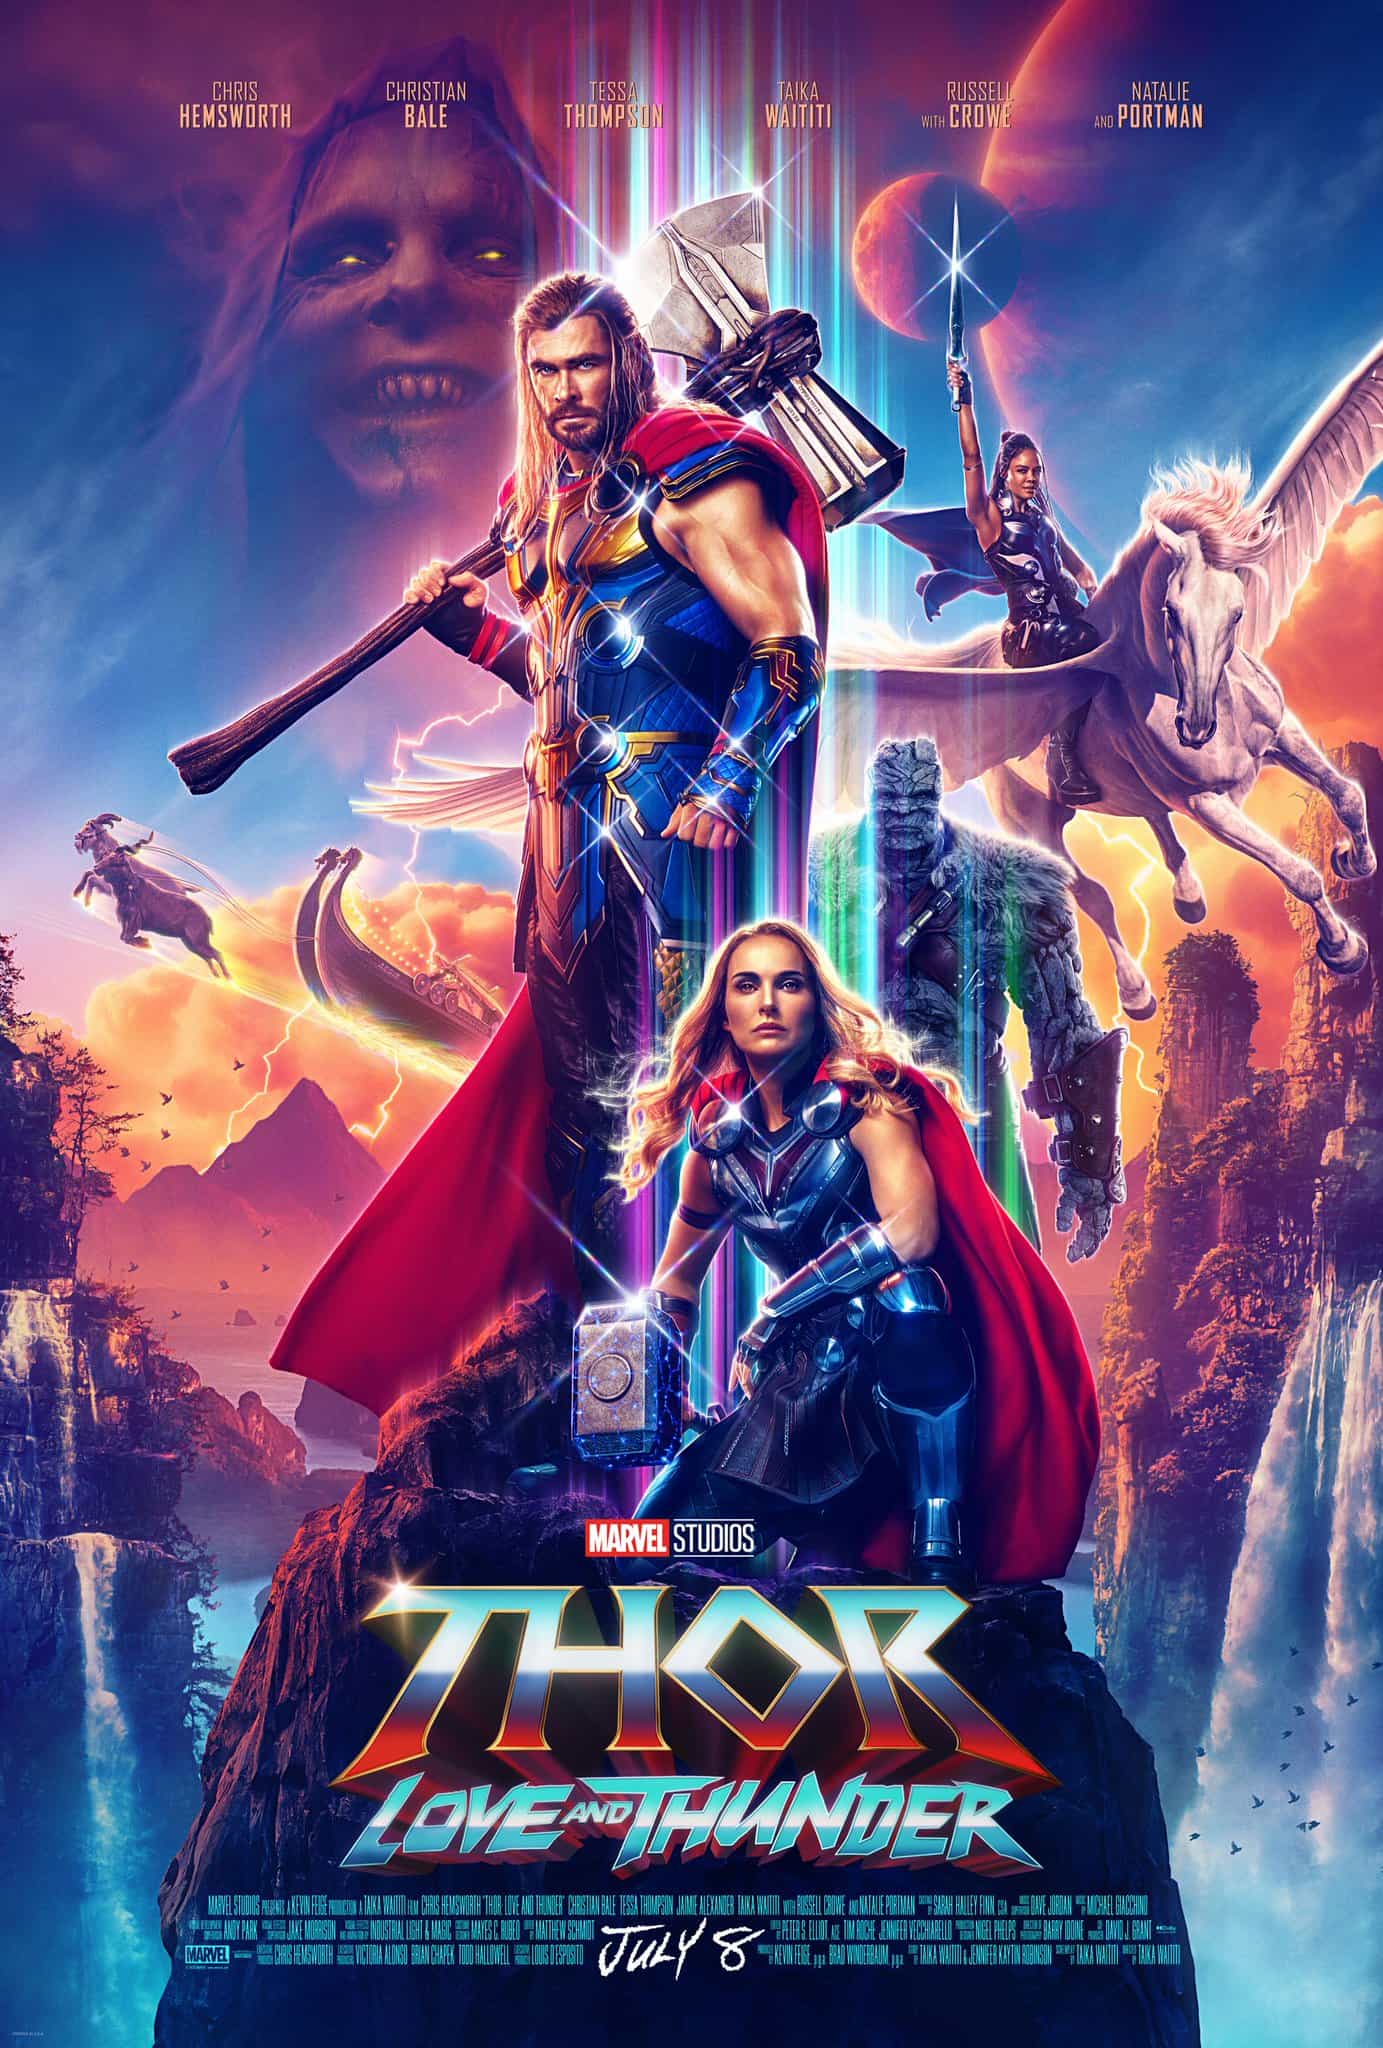 US Box Office Weekend Report 15th - 17th July 2022: Thor 4 remains at the top for a second weekend with Where The Crawdads Sing debuting at number 3